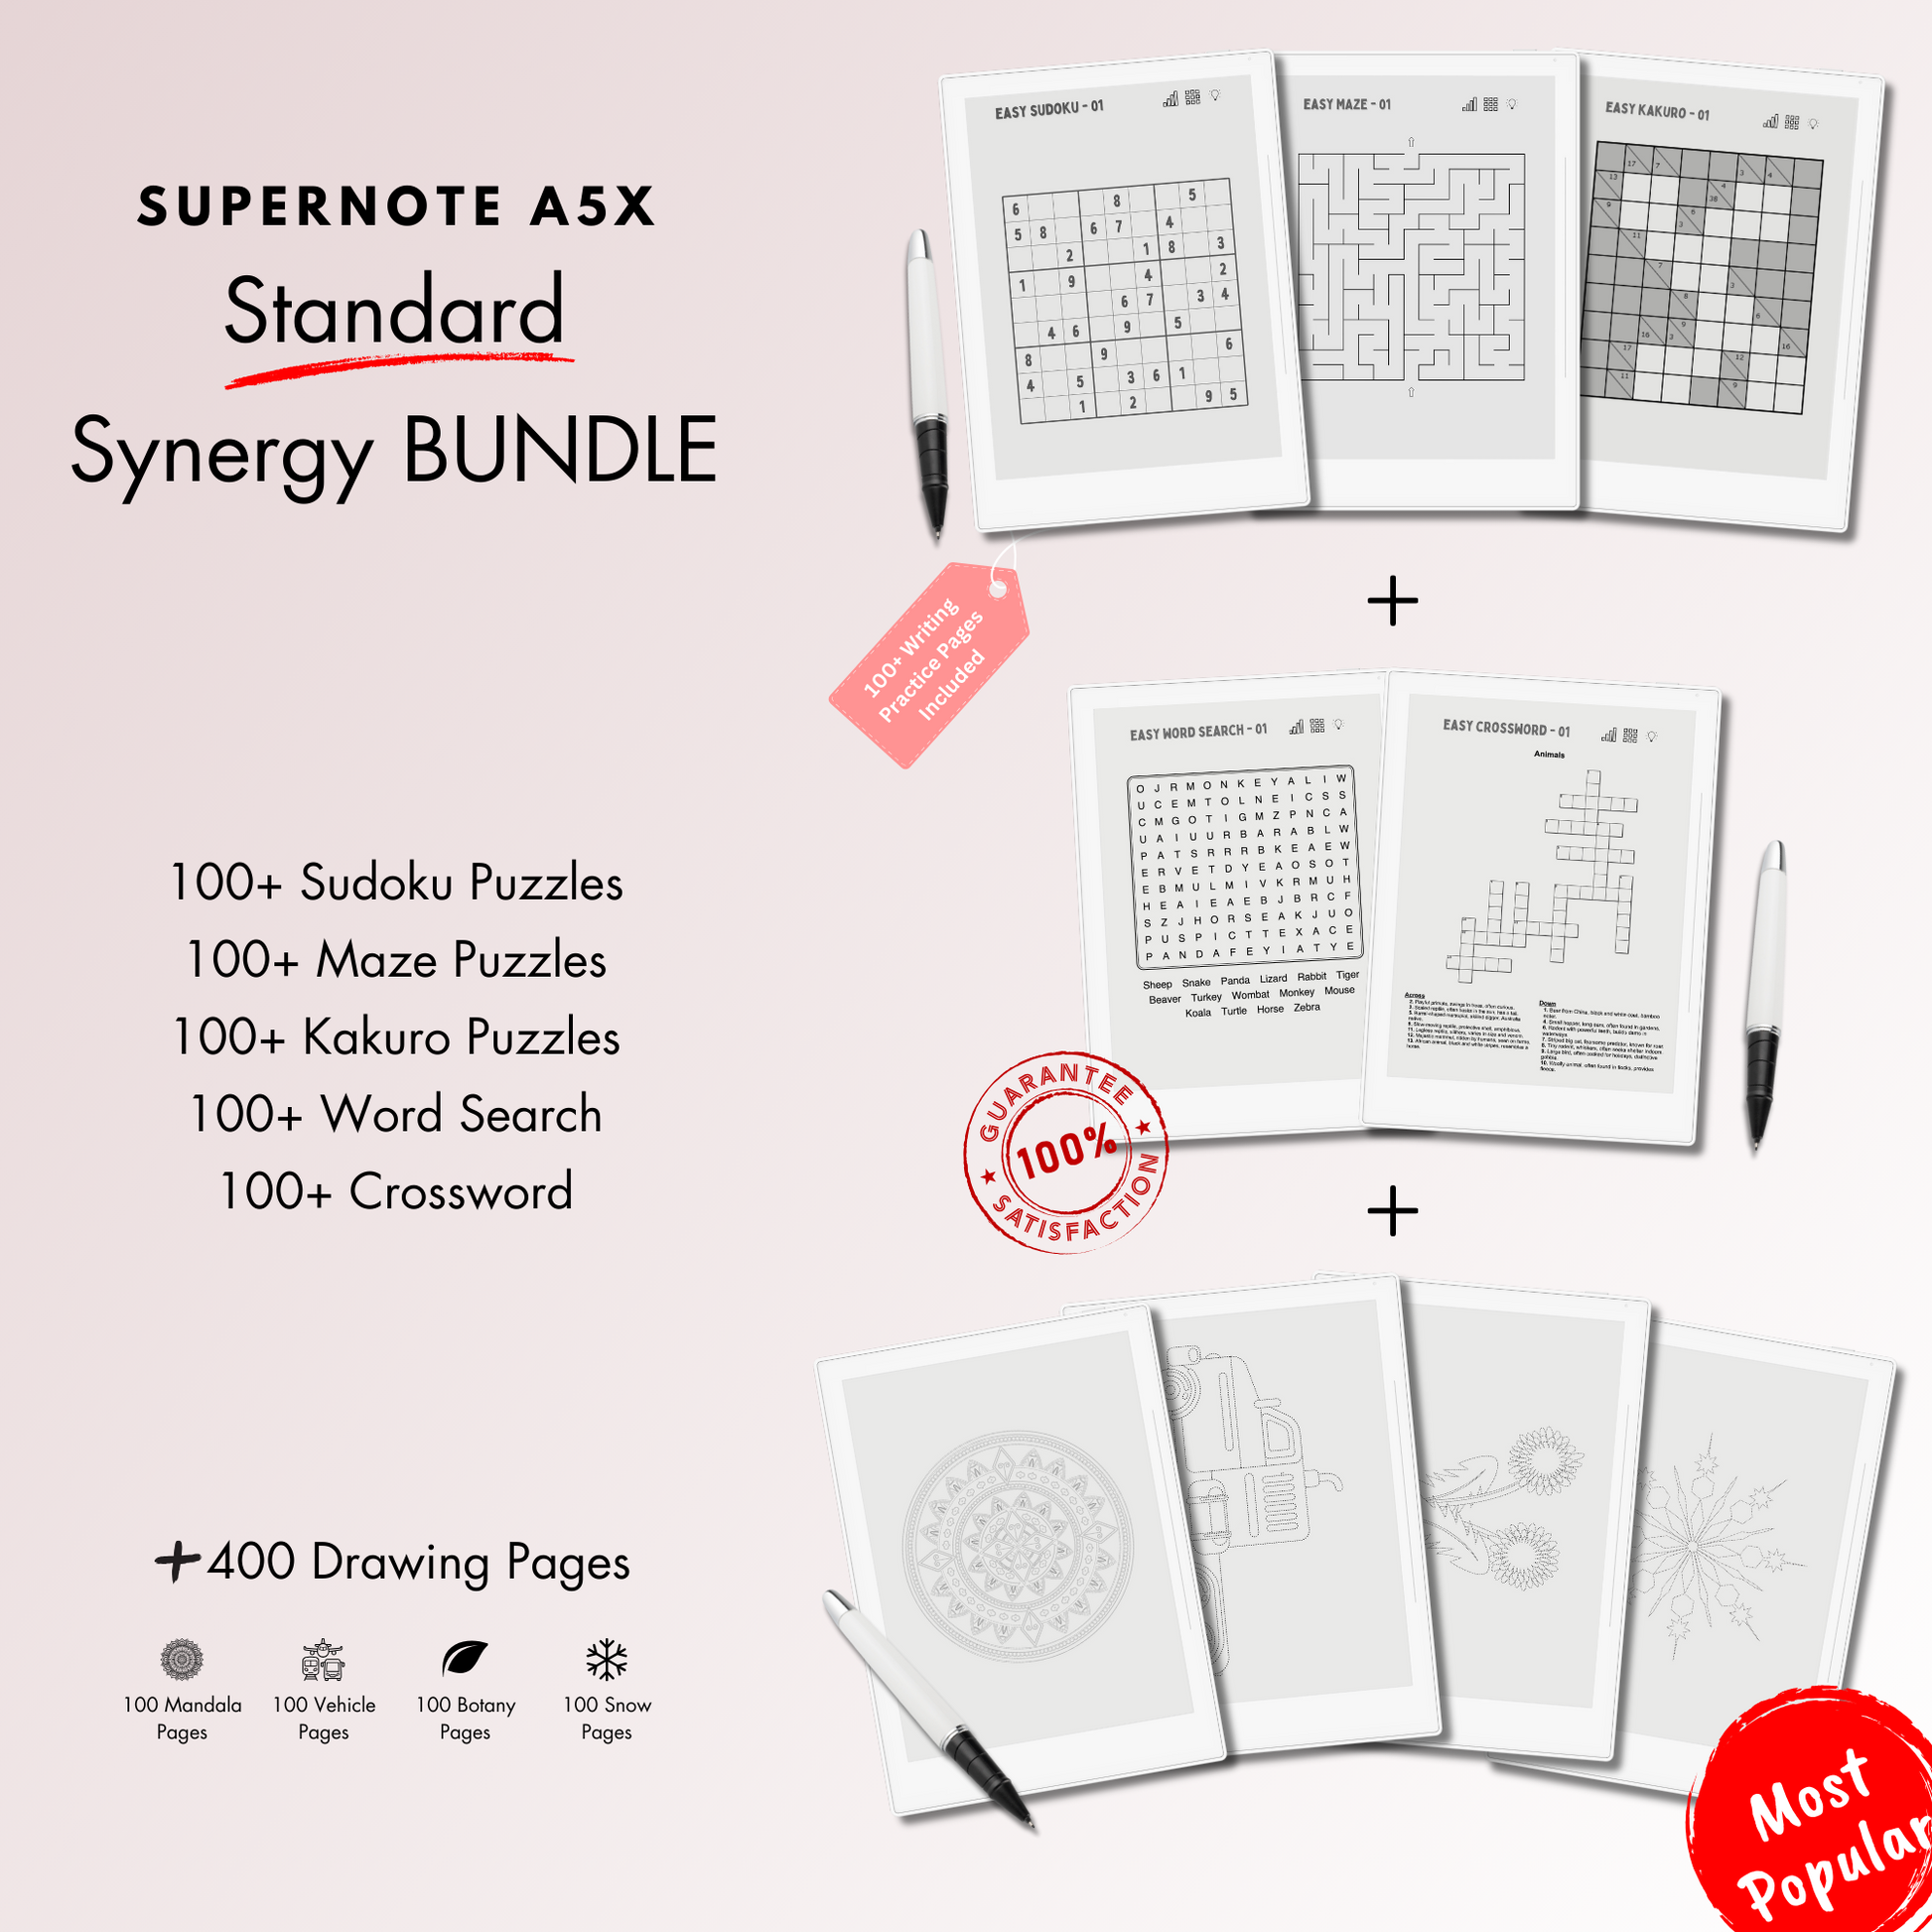 This is a Digital Bundle which includes Sudoku, Mazes, Kakuro, Word Search and Crossword Puzzles tailored for Supernote A5X and A6X.